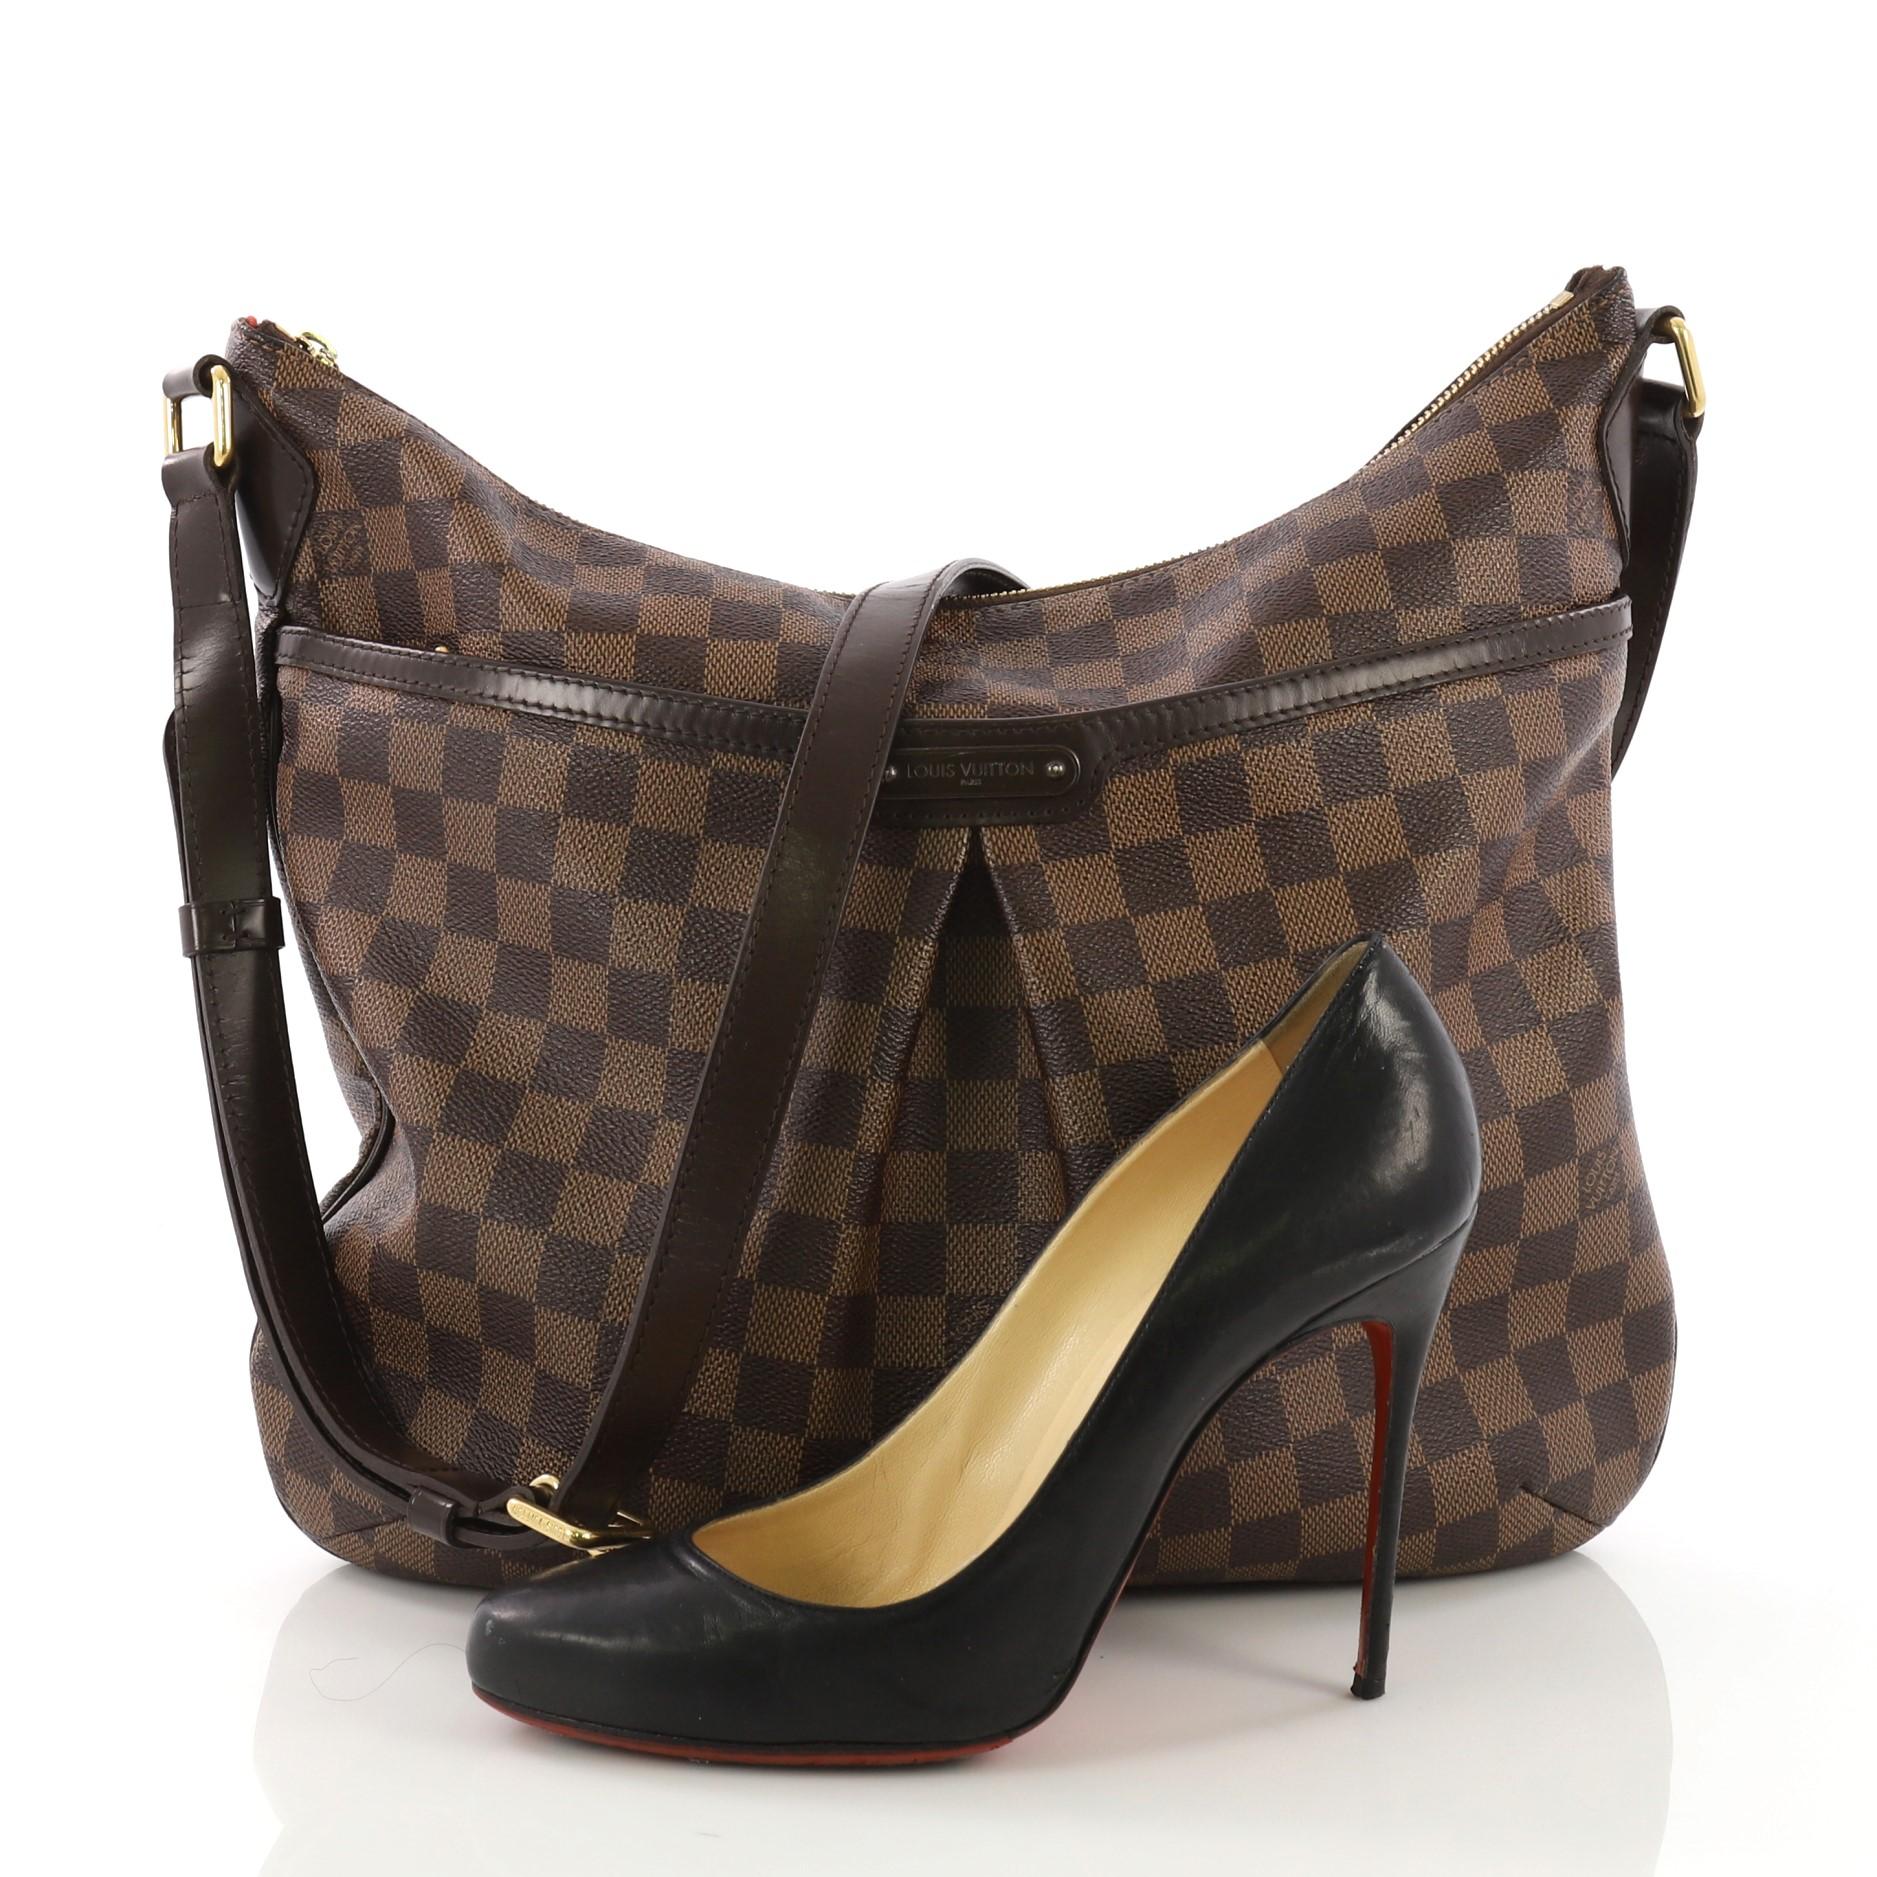 This Louis Vuitton Bloomsbury Handbag Damier GM, crafted from damier ebene coated canvas, features an adjustable leather strap, inverted pleating at the front, front zip pocket, brown leather trim, and gold-tone hardware. Its top zip closure opens